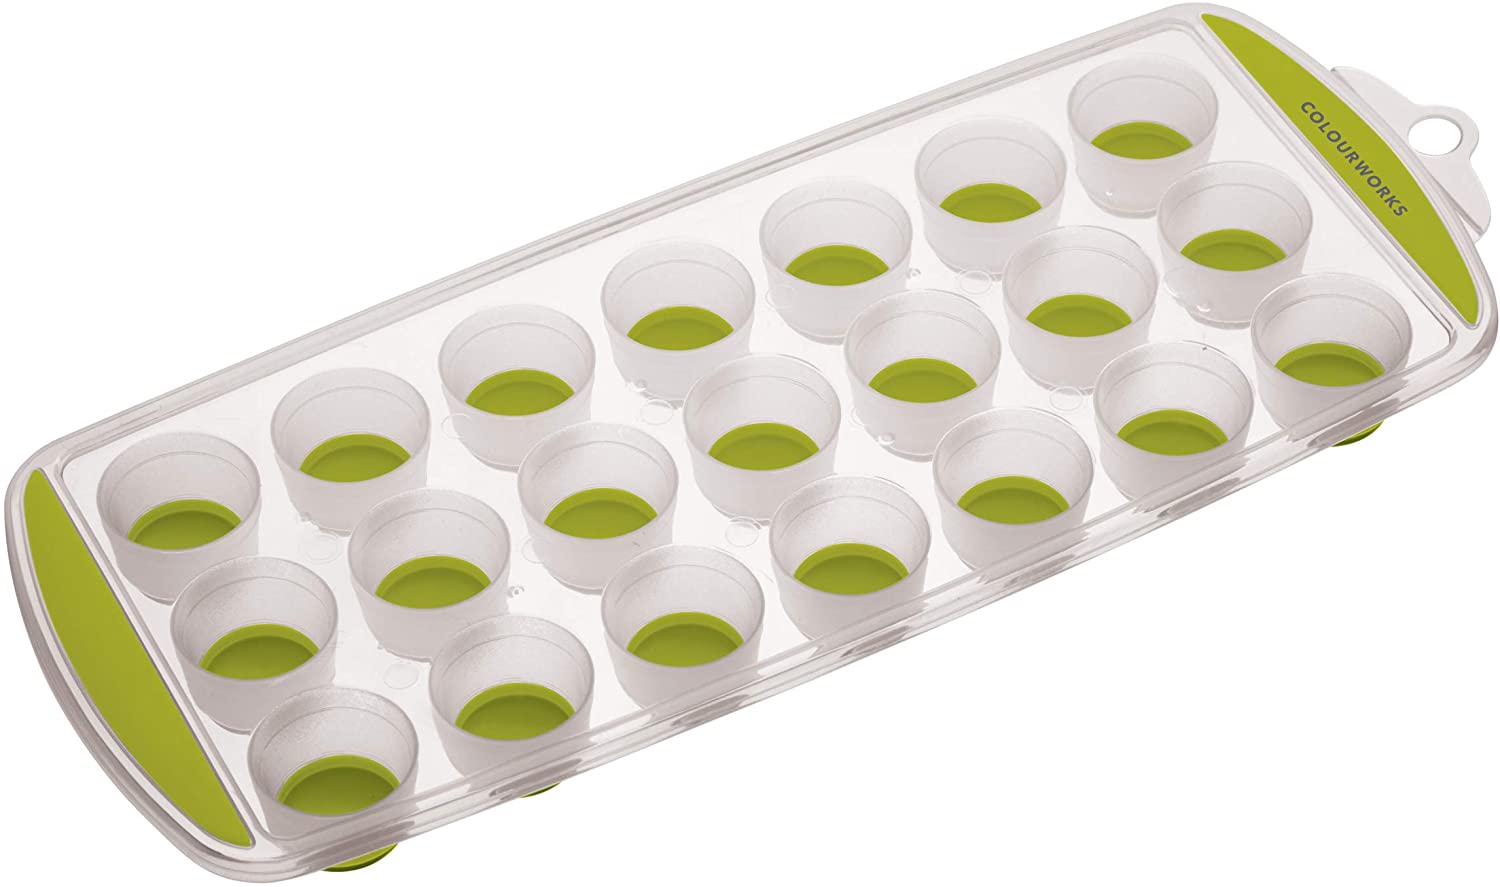 KitchenCraft Colourworks Pop-Out Ice Cube Tray for 21 Ice Cubes - Green